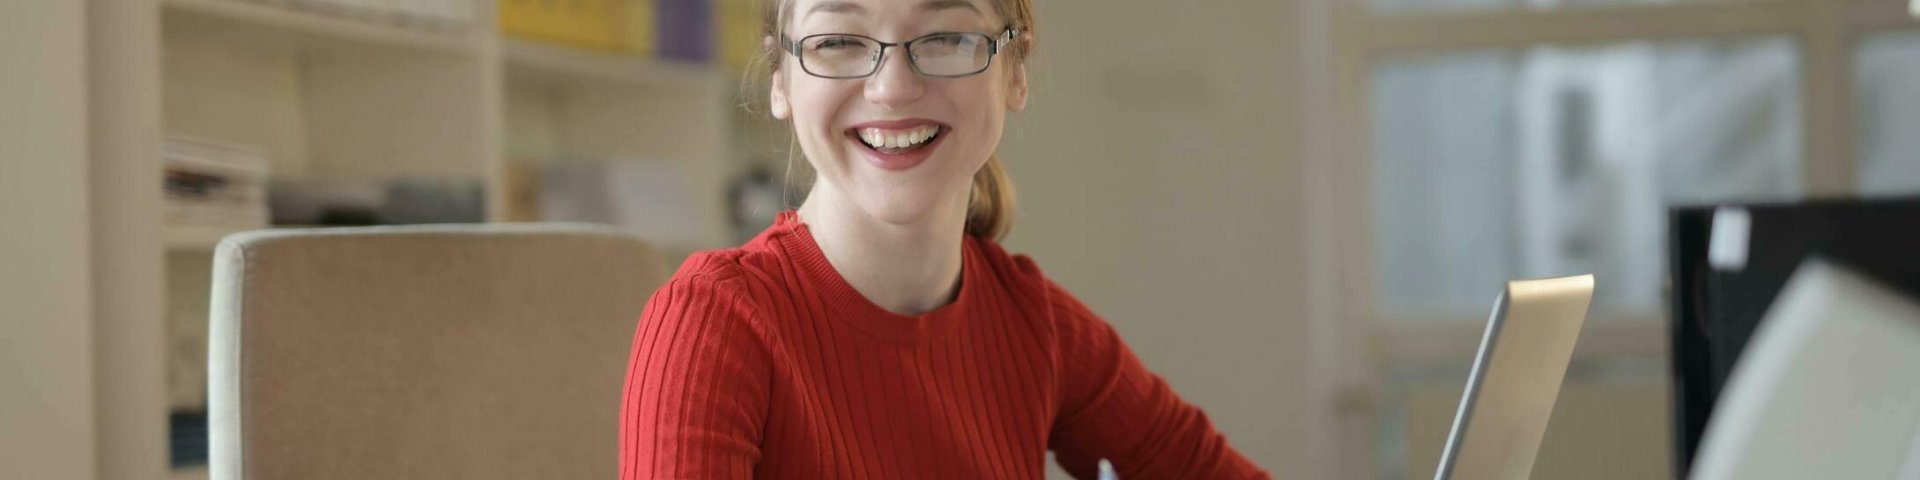 a woman in a red sweater smiling at her desk